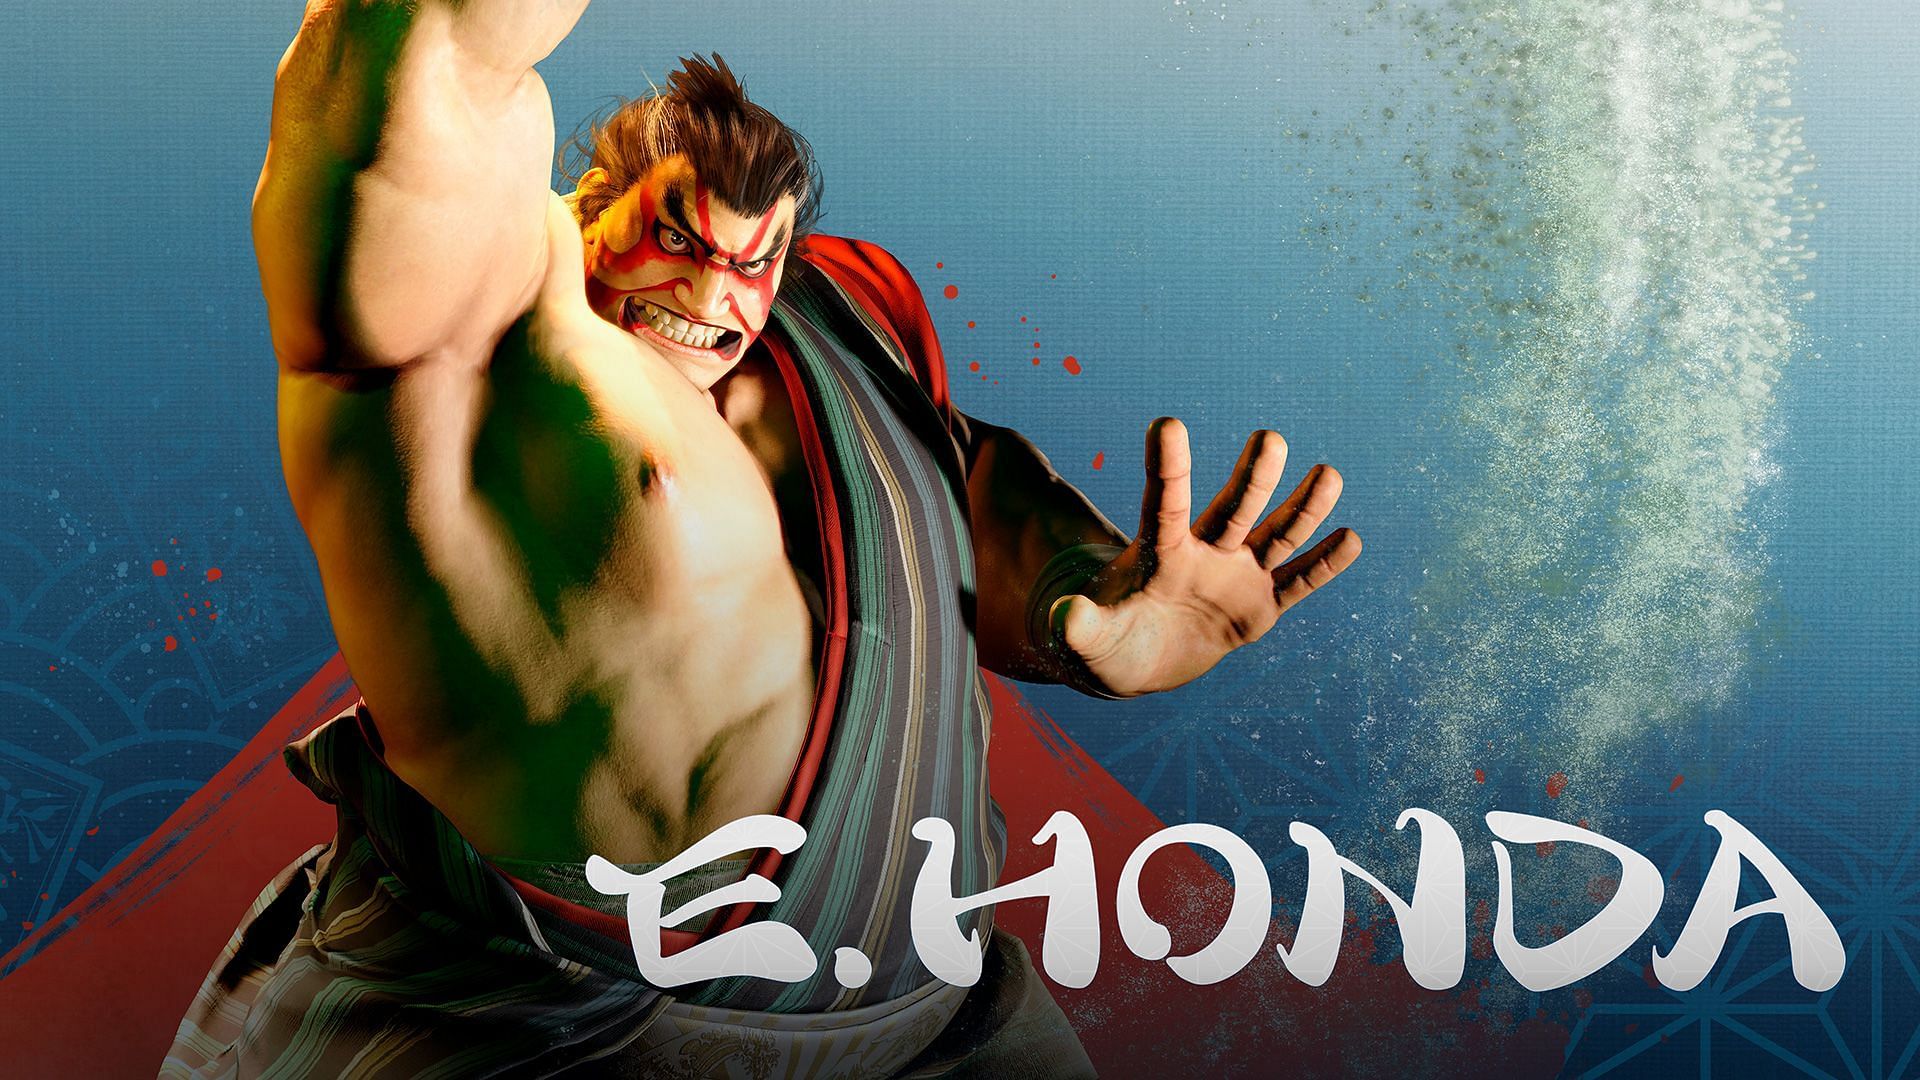 E Honda is a sumo fighter known for upholding his tradition (Image via Street Fighter)